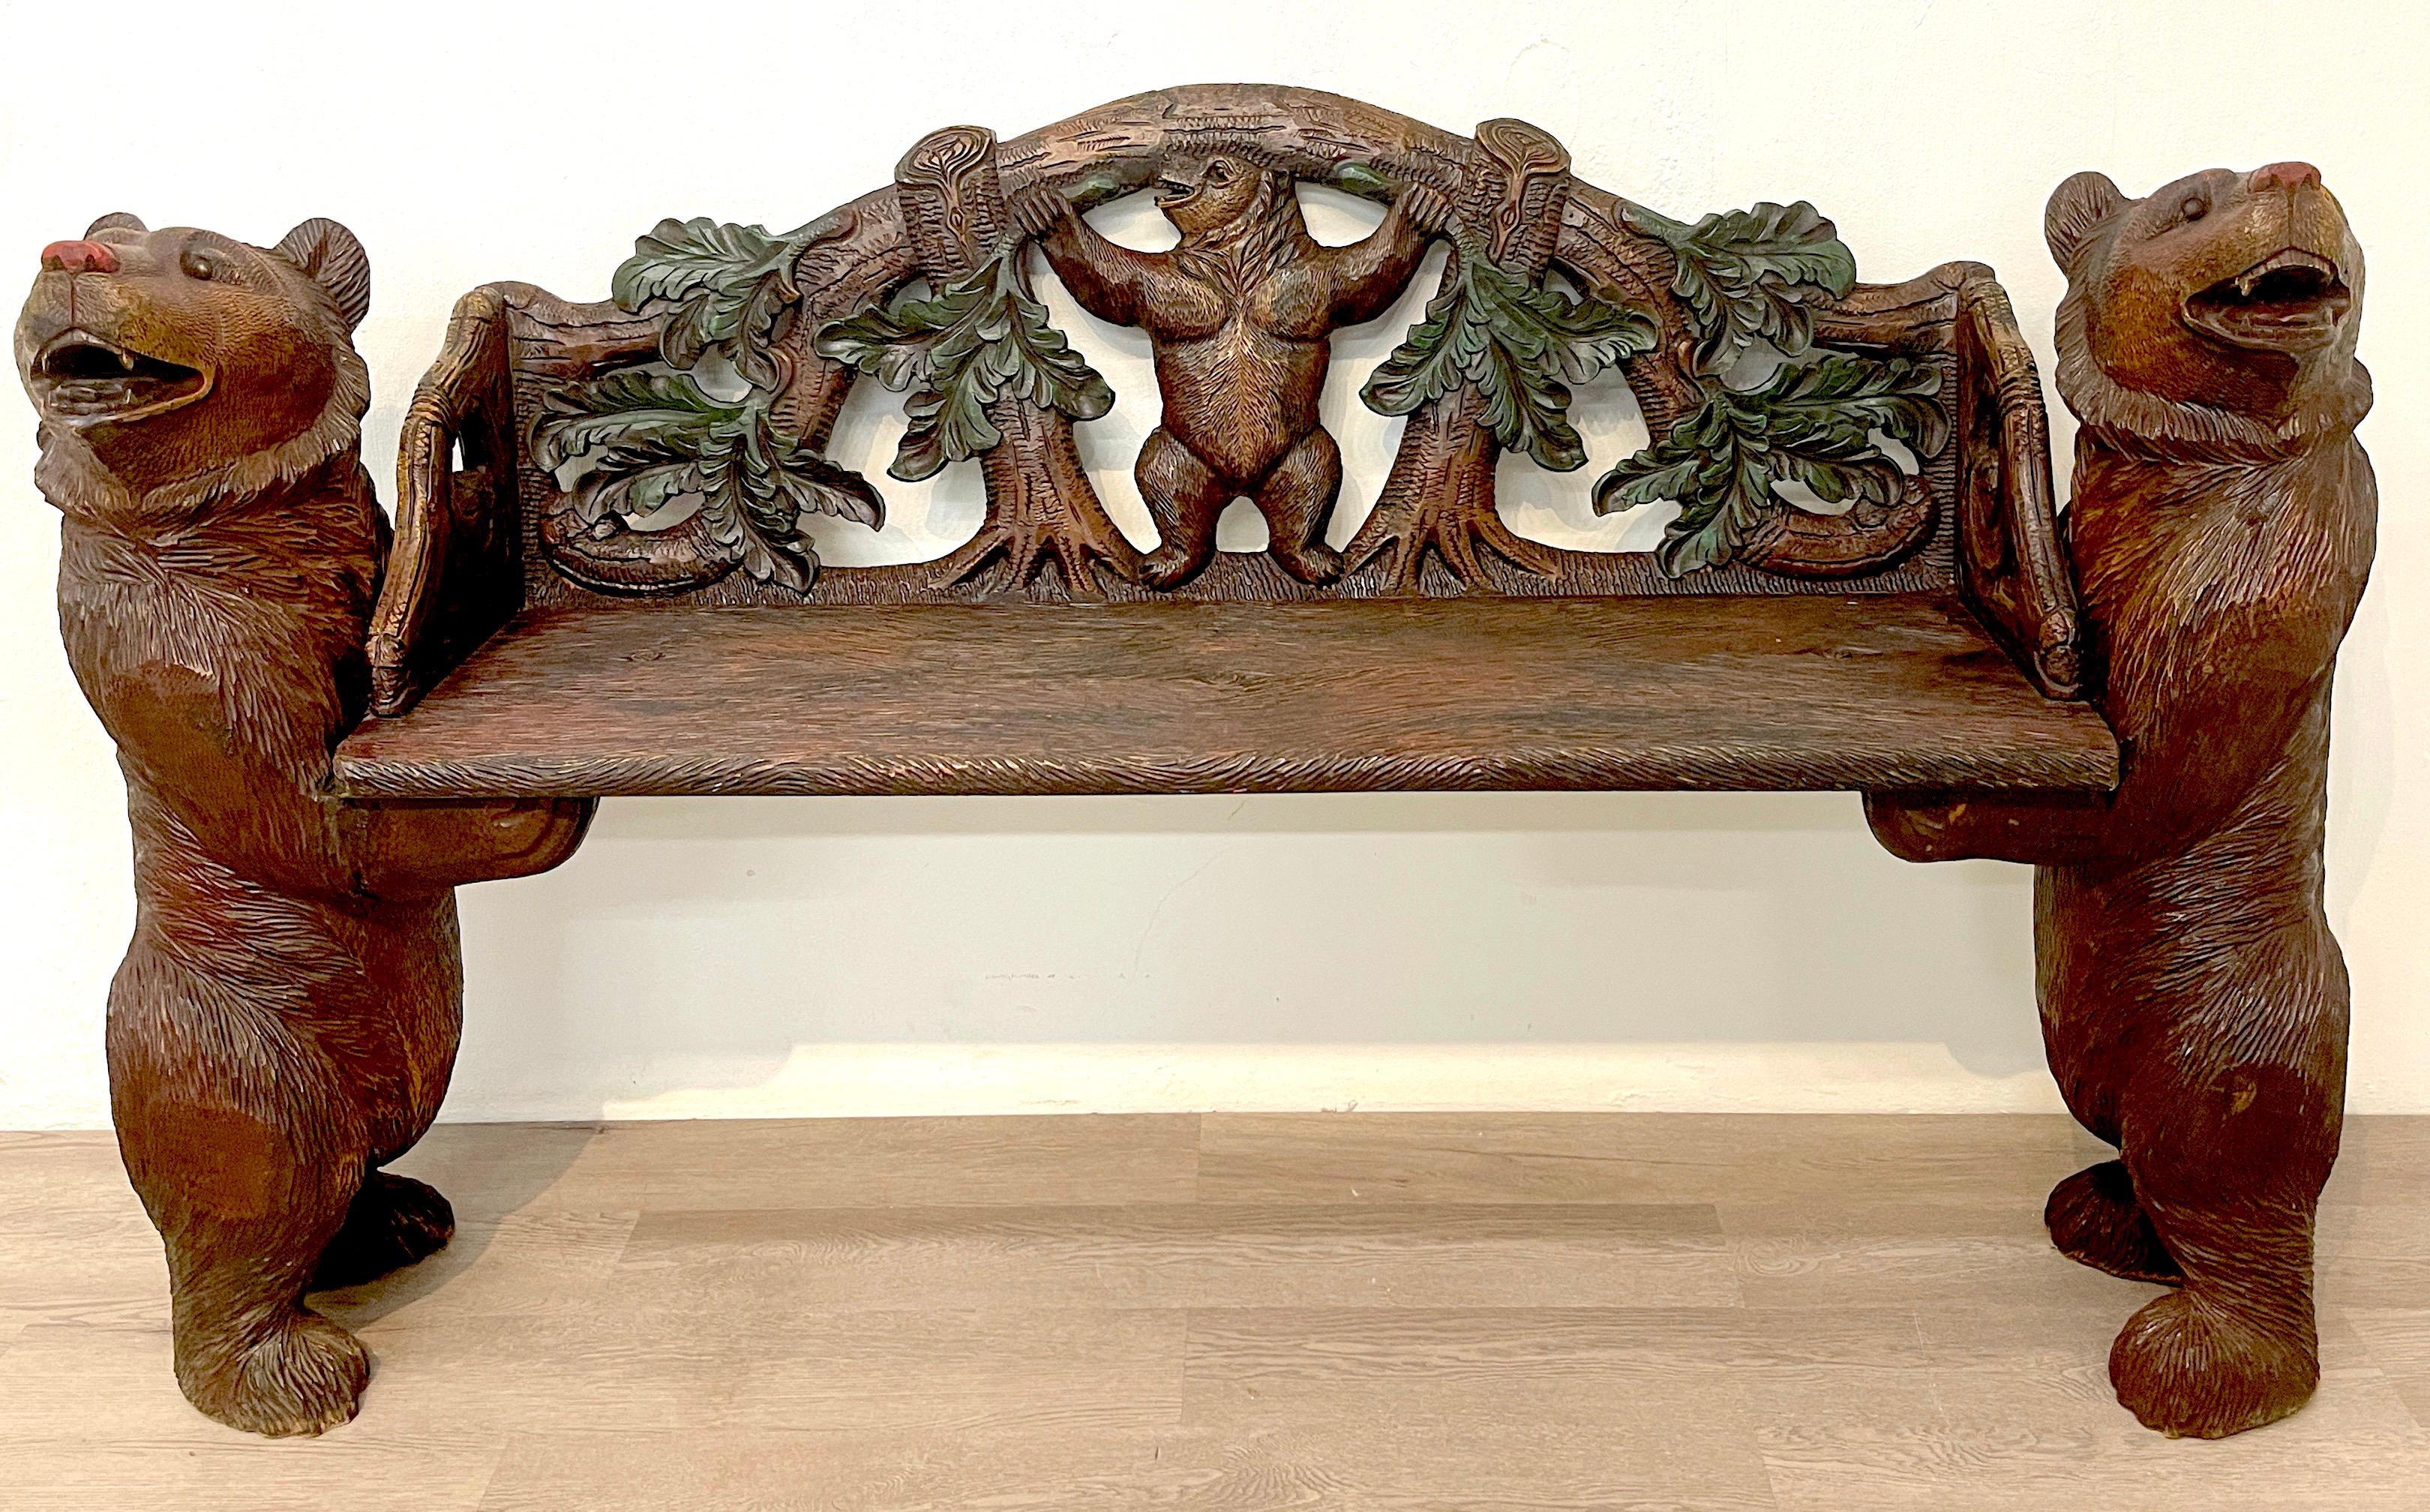 Black Forest carved walnut & polychromed 'Three Bears' bench
Inspired by 